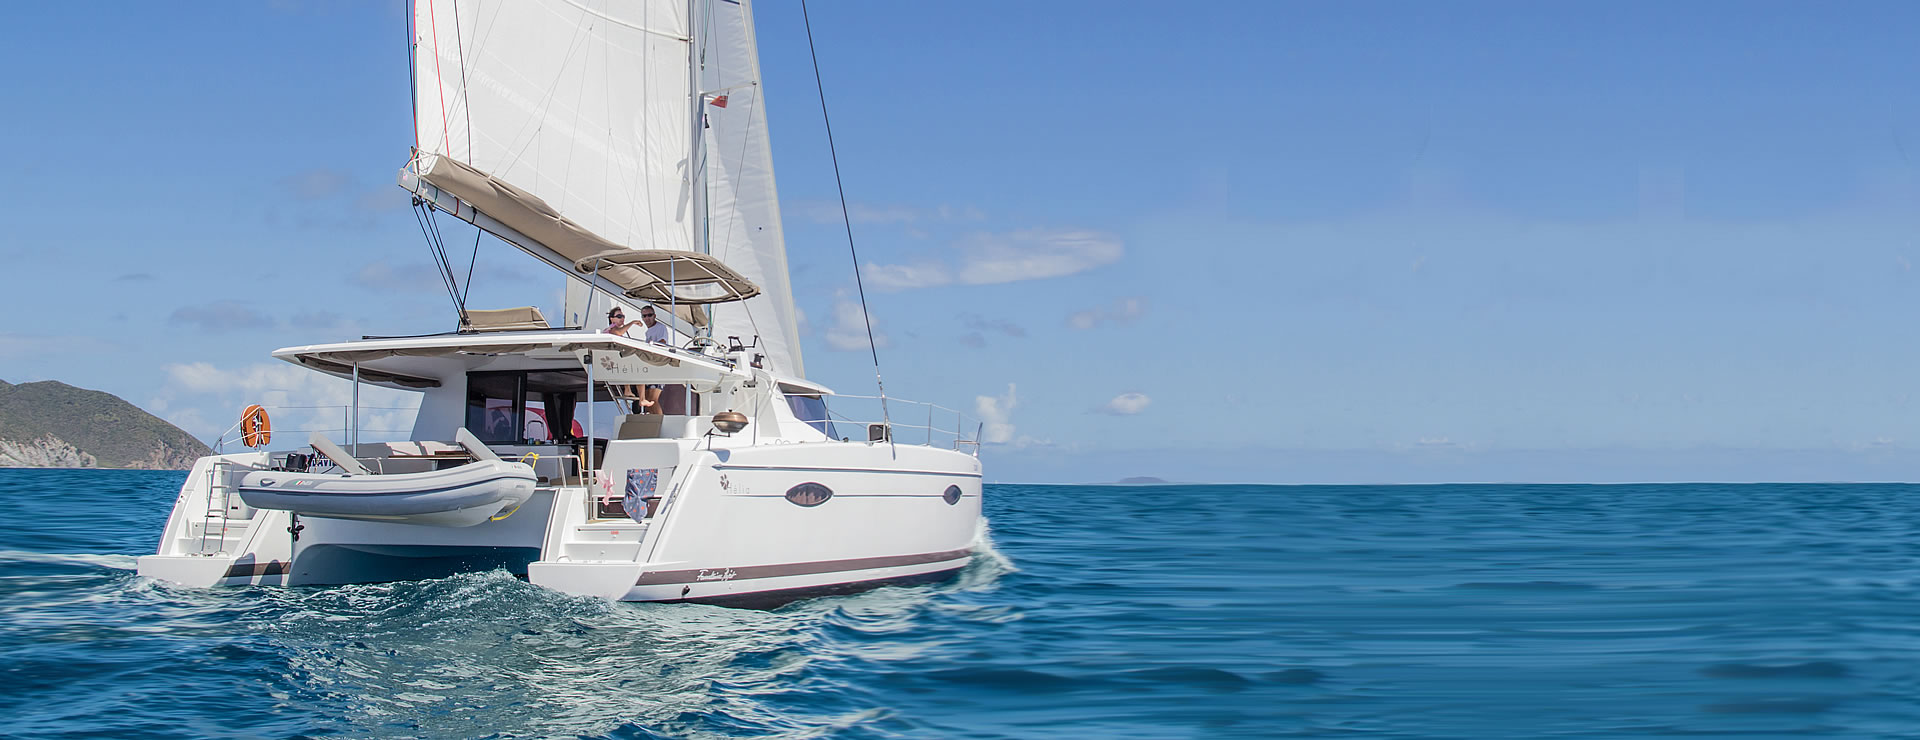 Sail across Greece on board of your own charter yacht